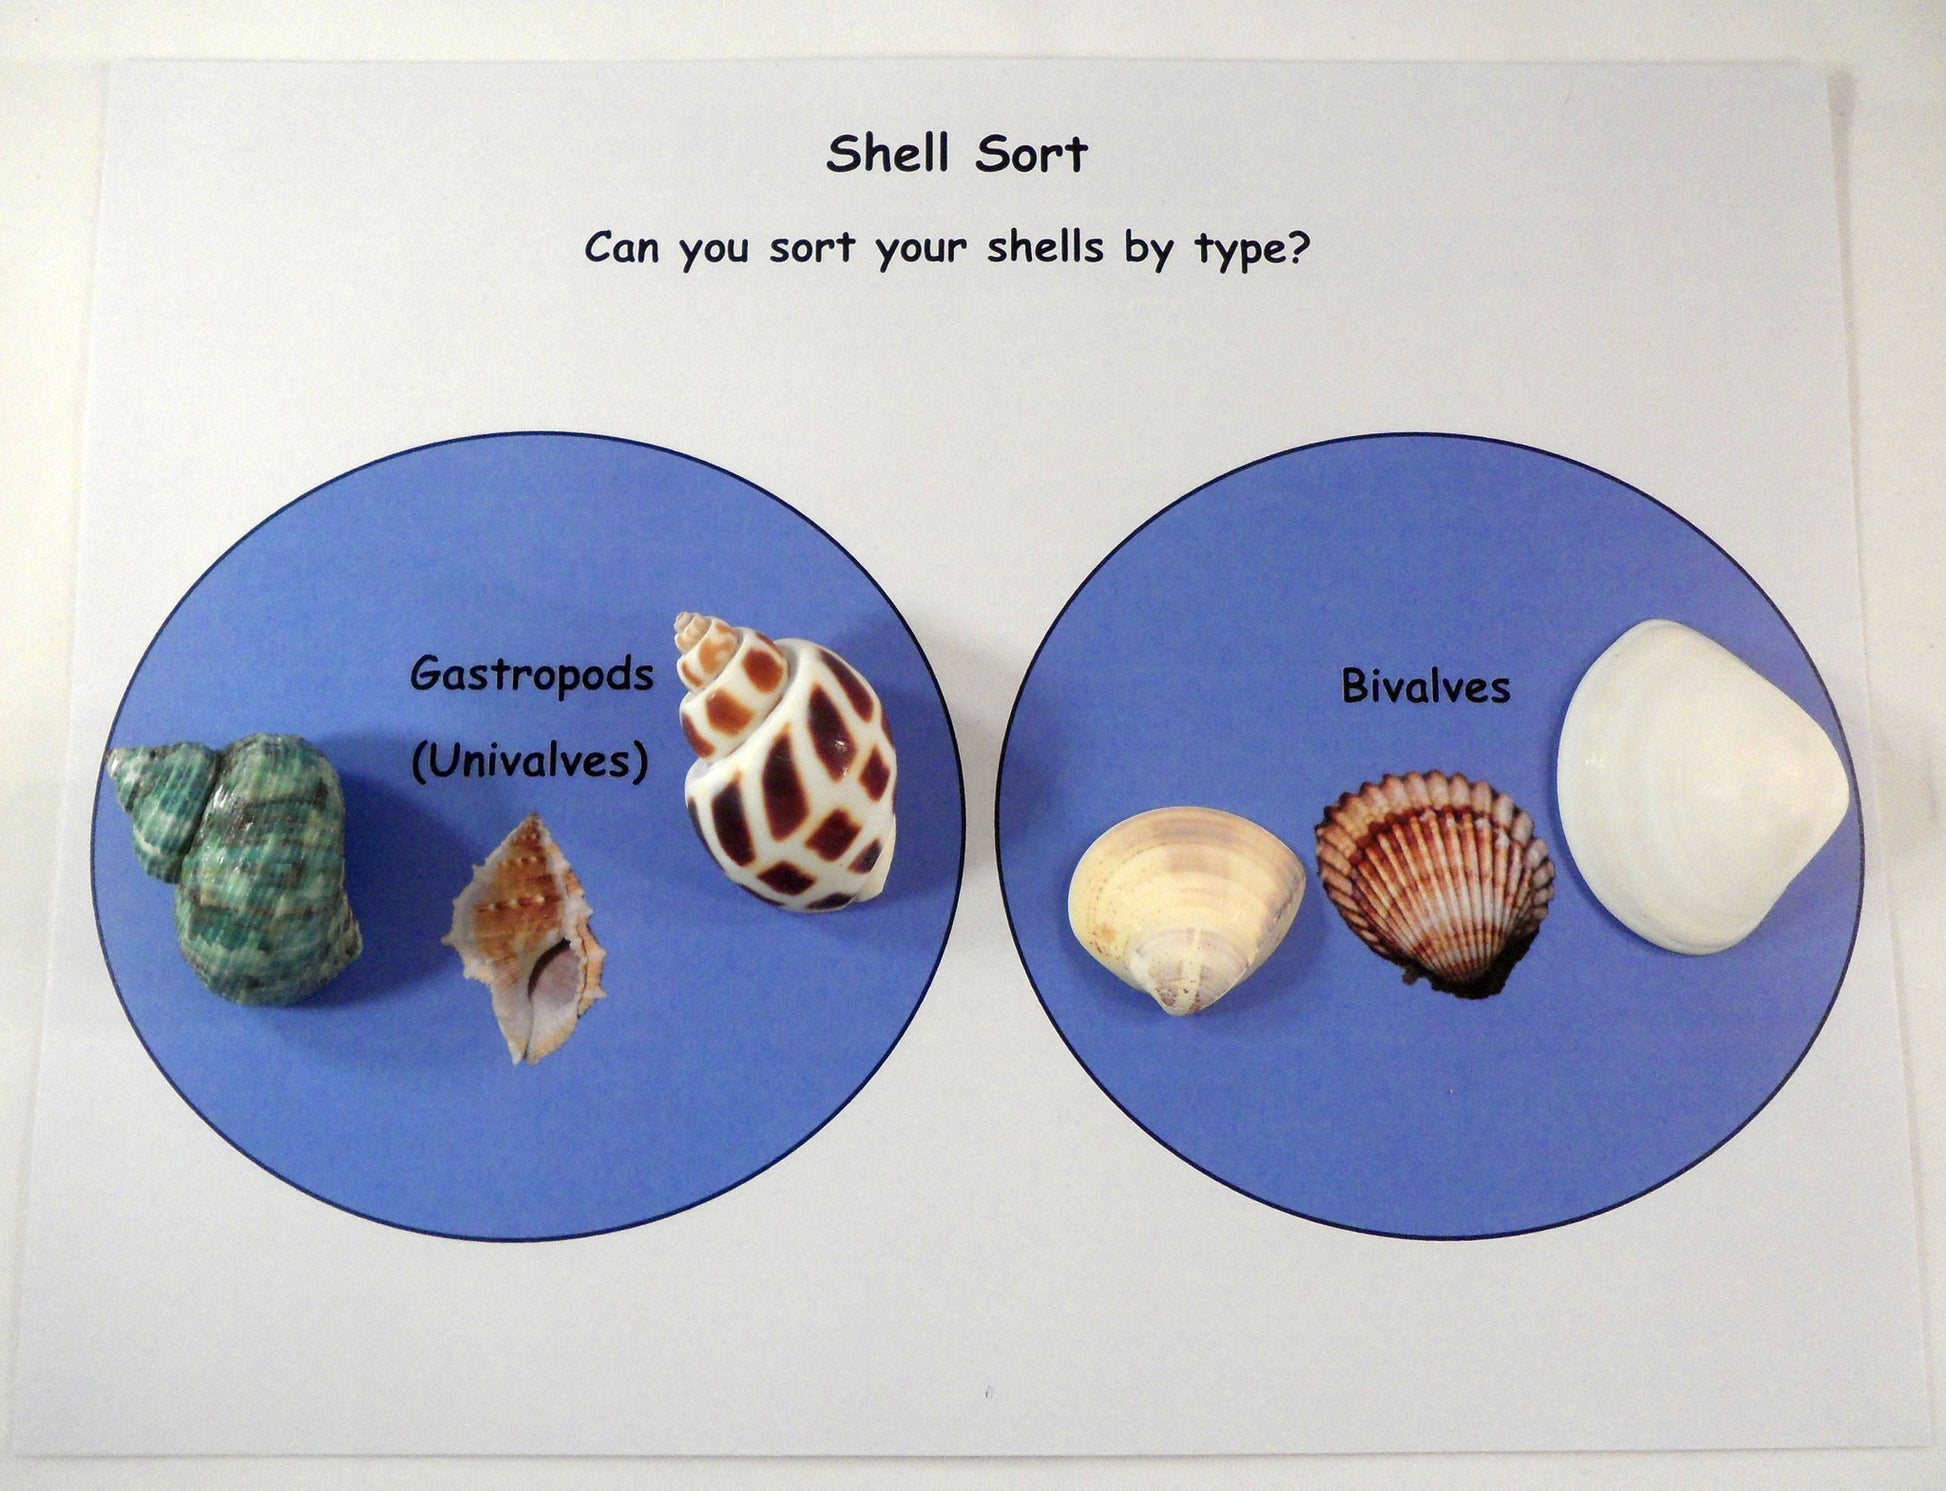 Comparing shells - A House for Hermit Crab - Ivy Kids subscription box activities.